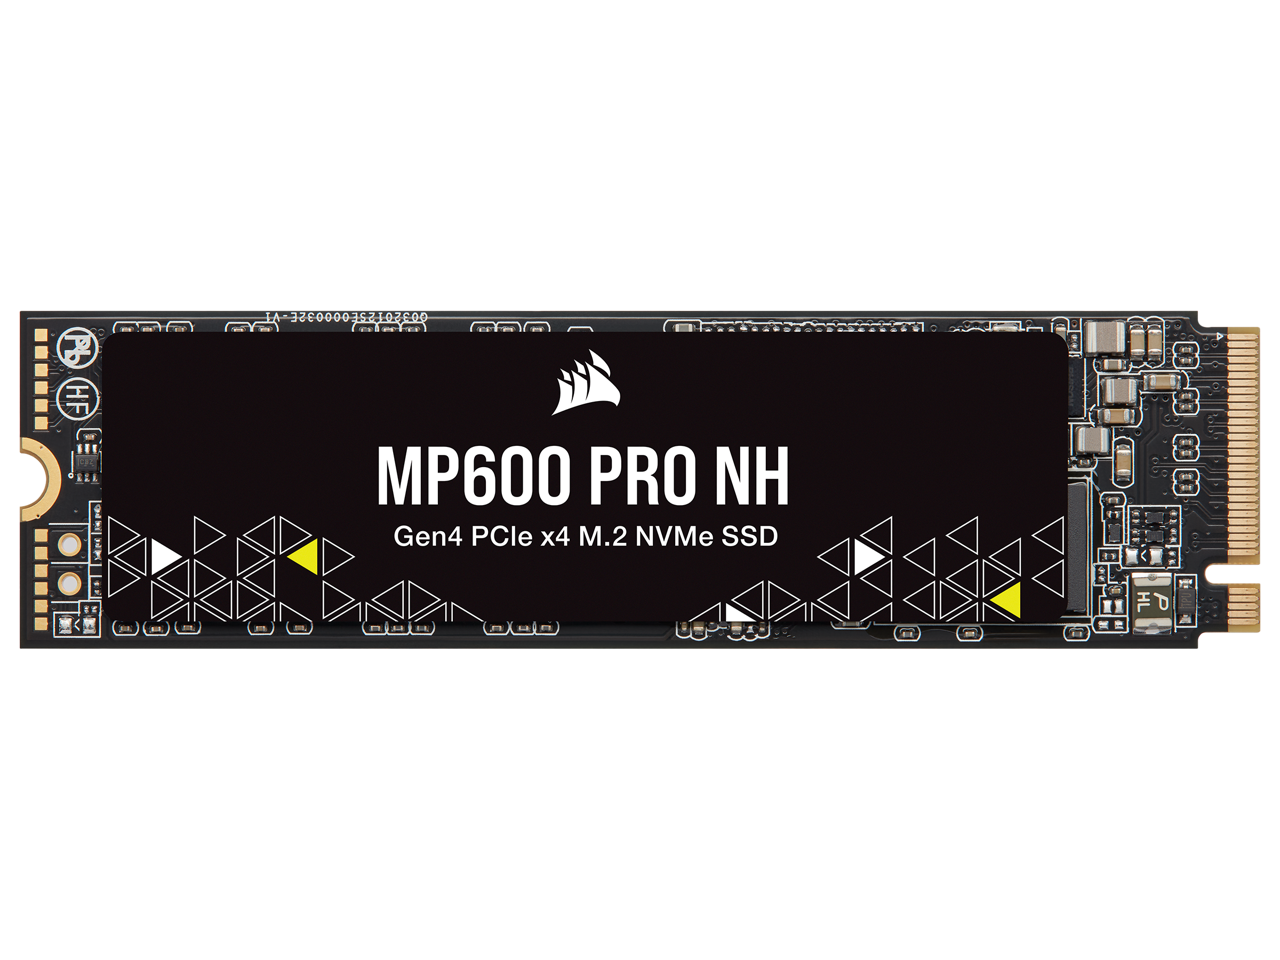 2TB Corsair MP600 PRO NH M.2 NVMe PCIe Gen4 x4 Solid State Drive SSD $155 + Free Shipping